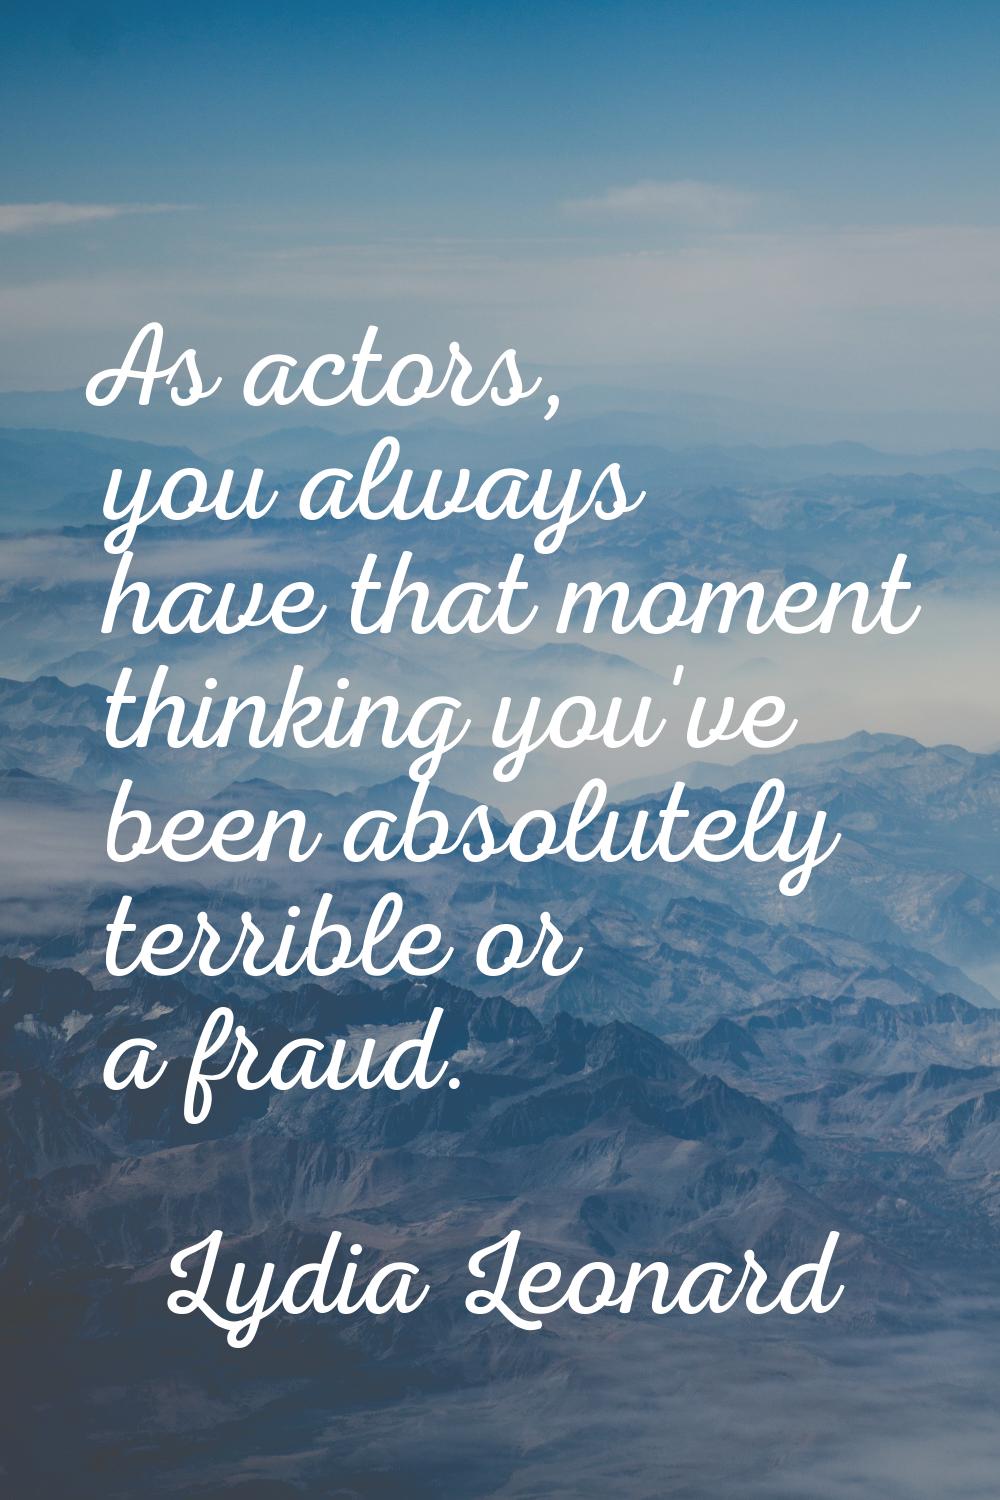 As actors, you always have that moment thinking you've been absolutely terrible or a fraud.